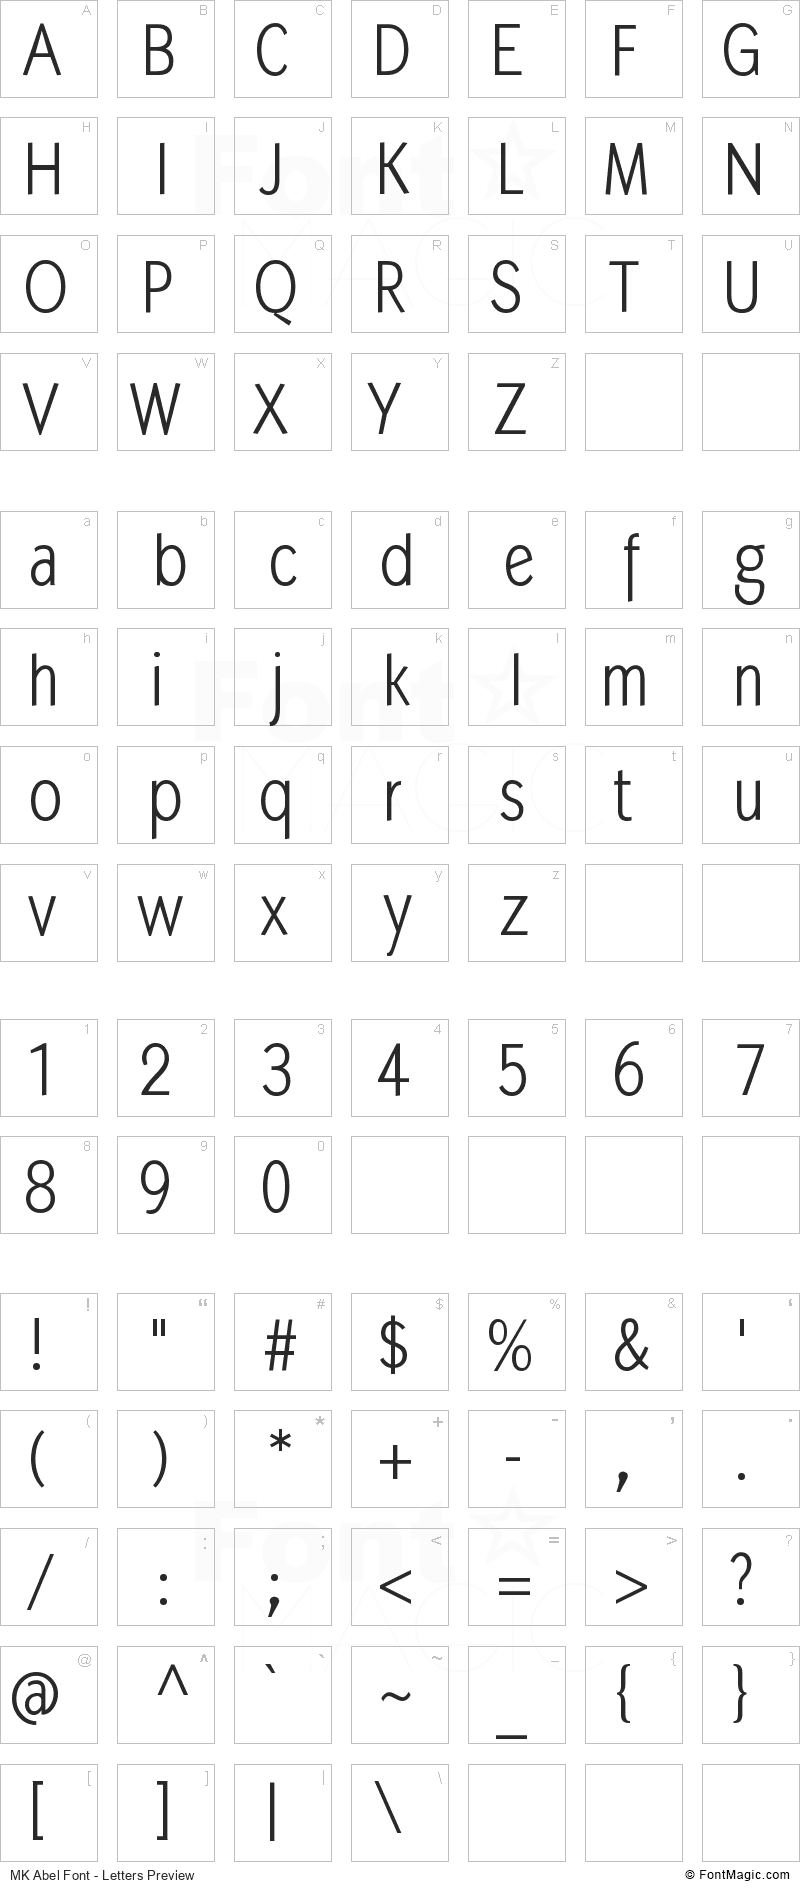 MK Abel Font - All Latters Preview Chart